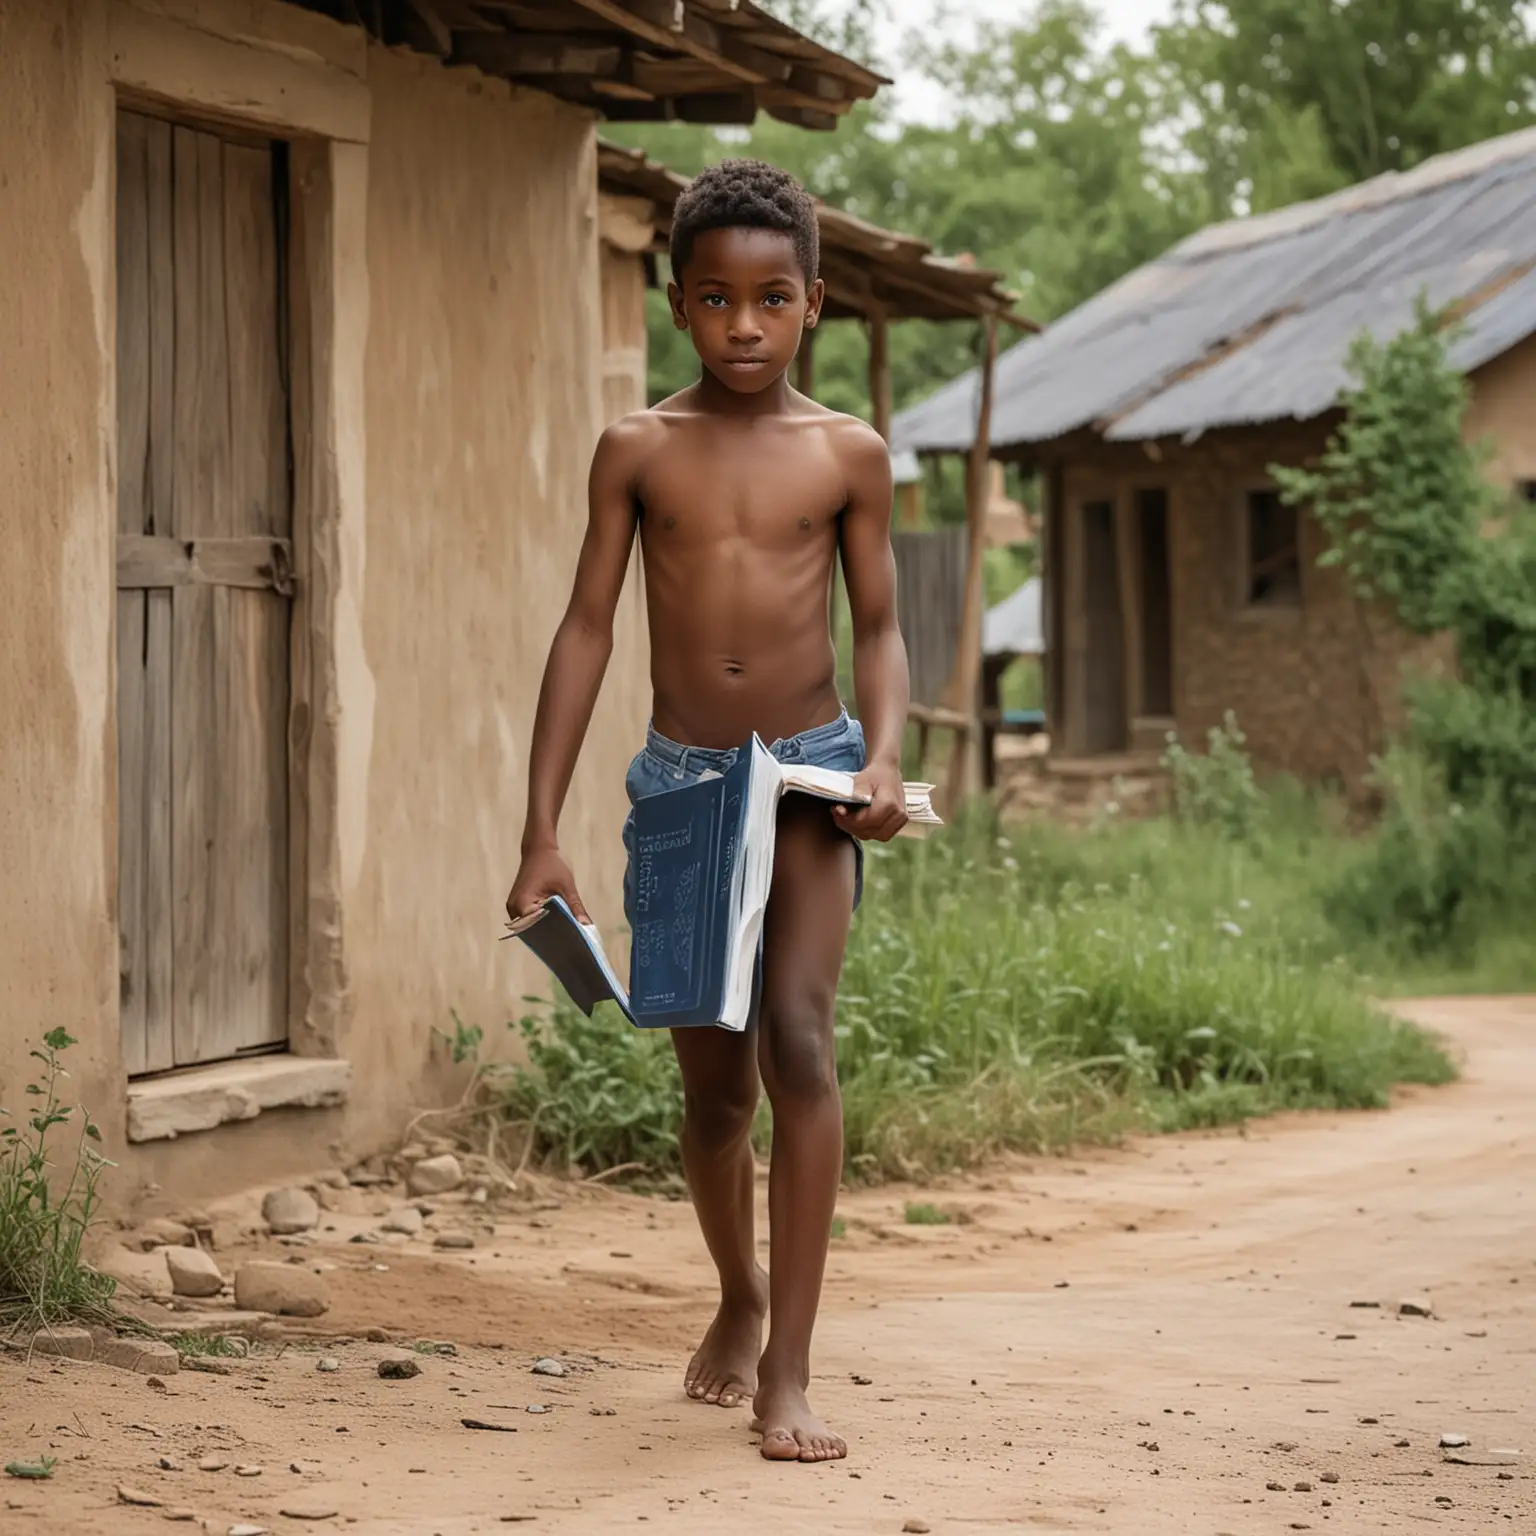 Young-Black-Boy-Holding-Book-in-Rural-Village-Setting